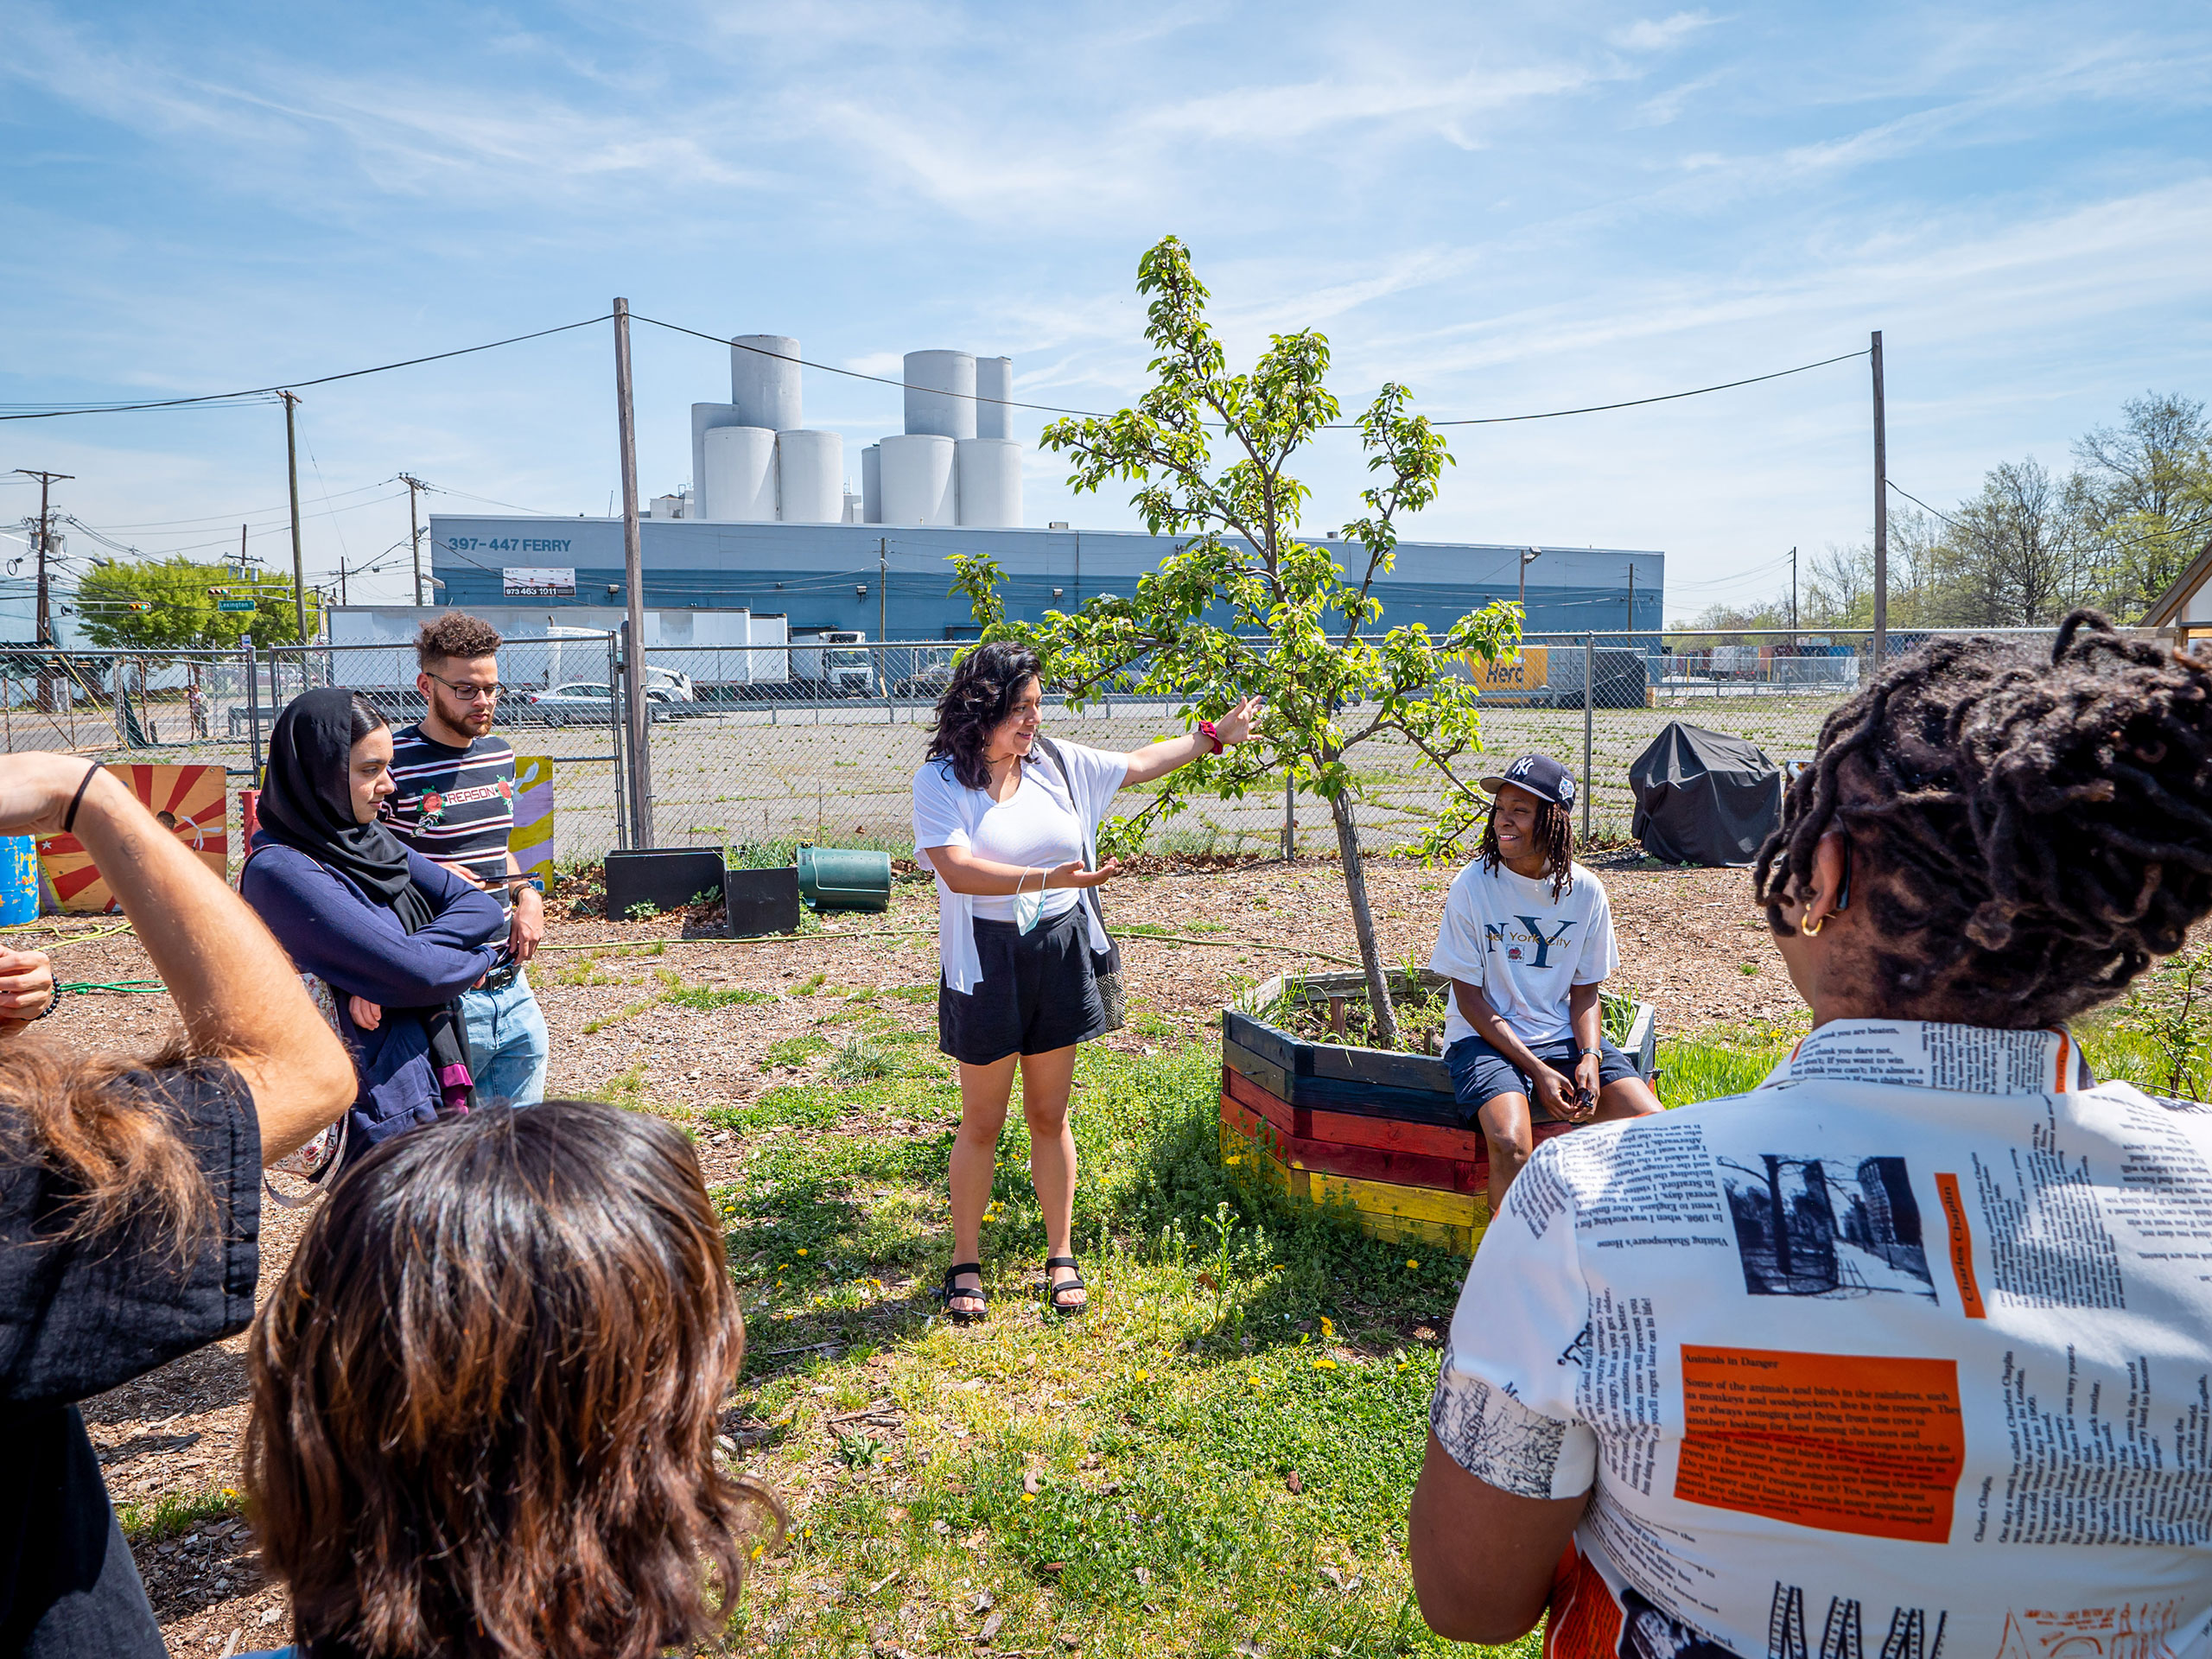 A factory visible in the background as a tour guide next to a tree speaks to a group of people at a community garden.